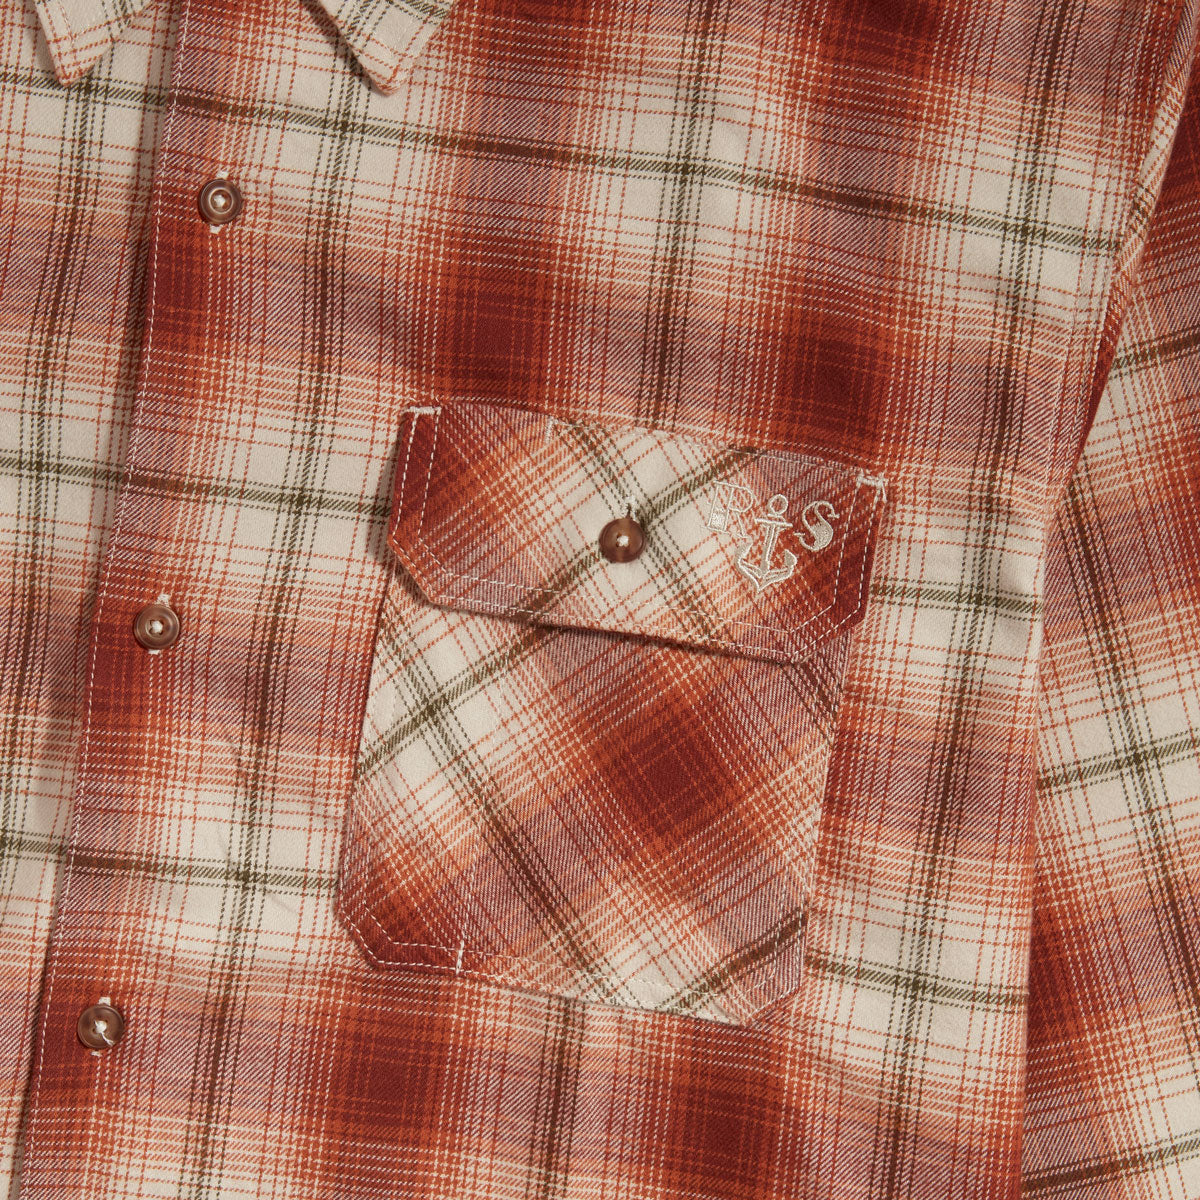 Dickies Ronnie Sandoval Brushed Flannel Shirt - Burnt Ombre Plaid image 2